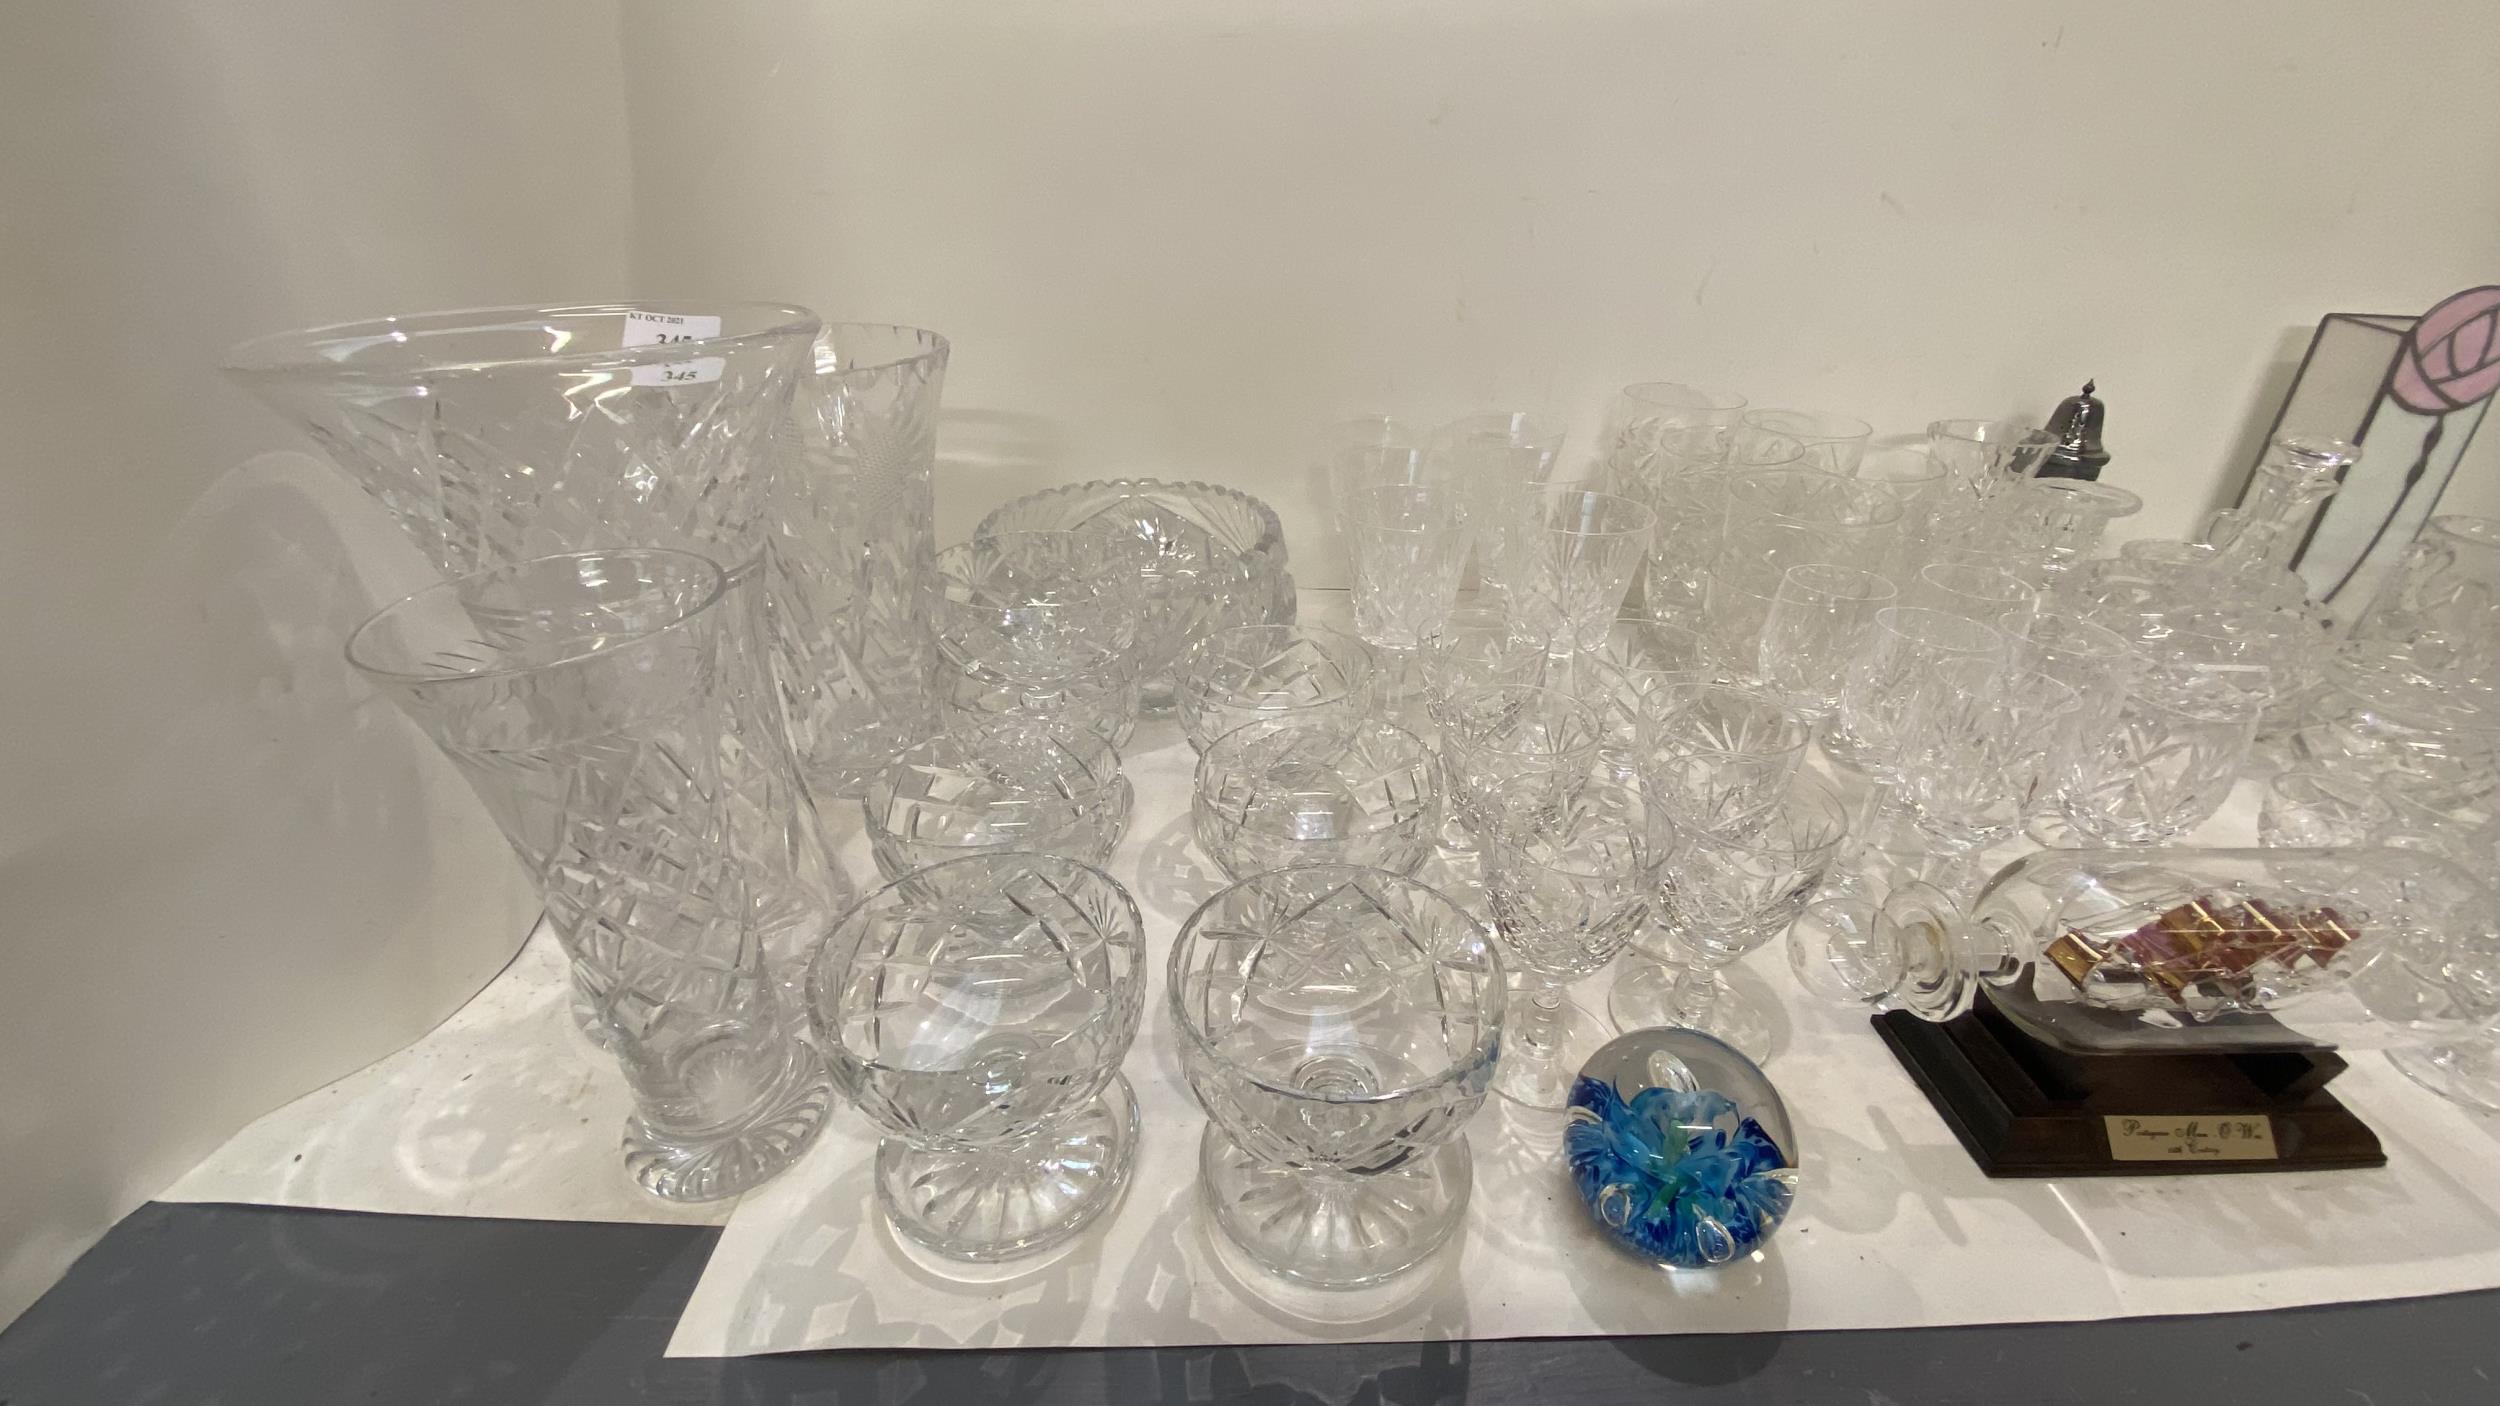 Large qty of glass wear including decanters, vases, wine glassed, tumblers etc. - Image 2 of 7